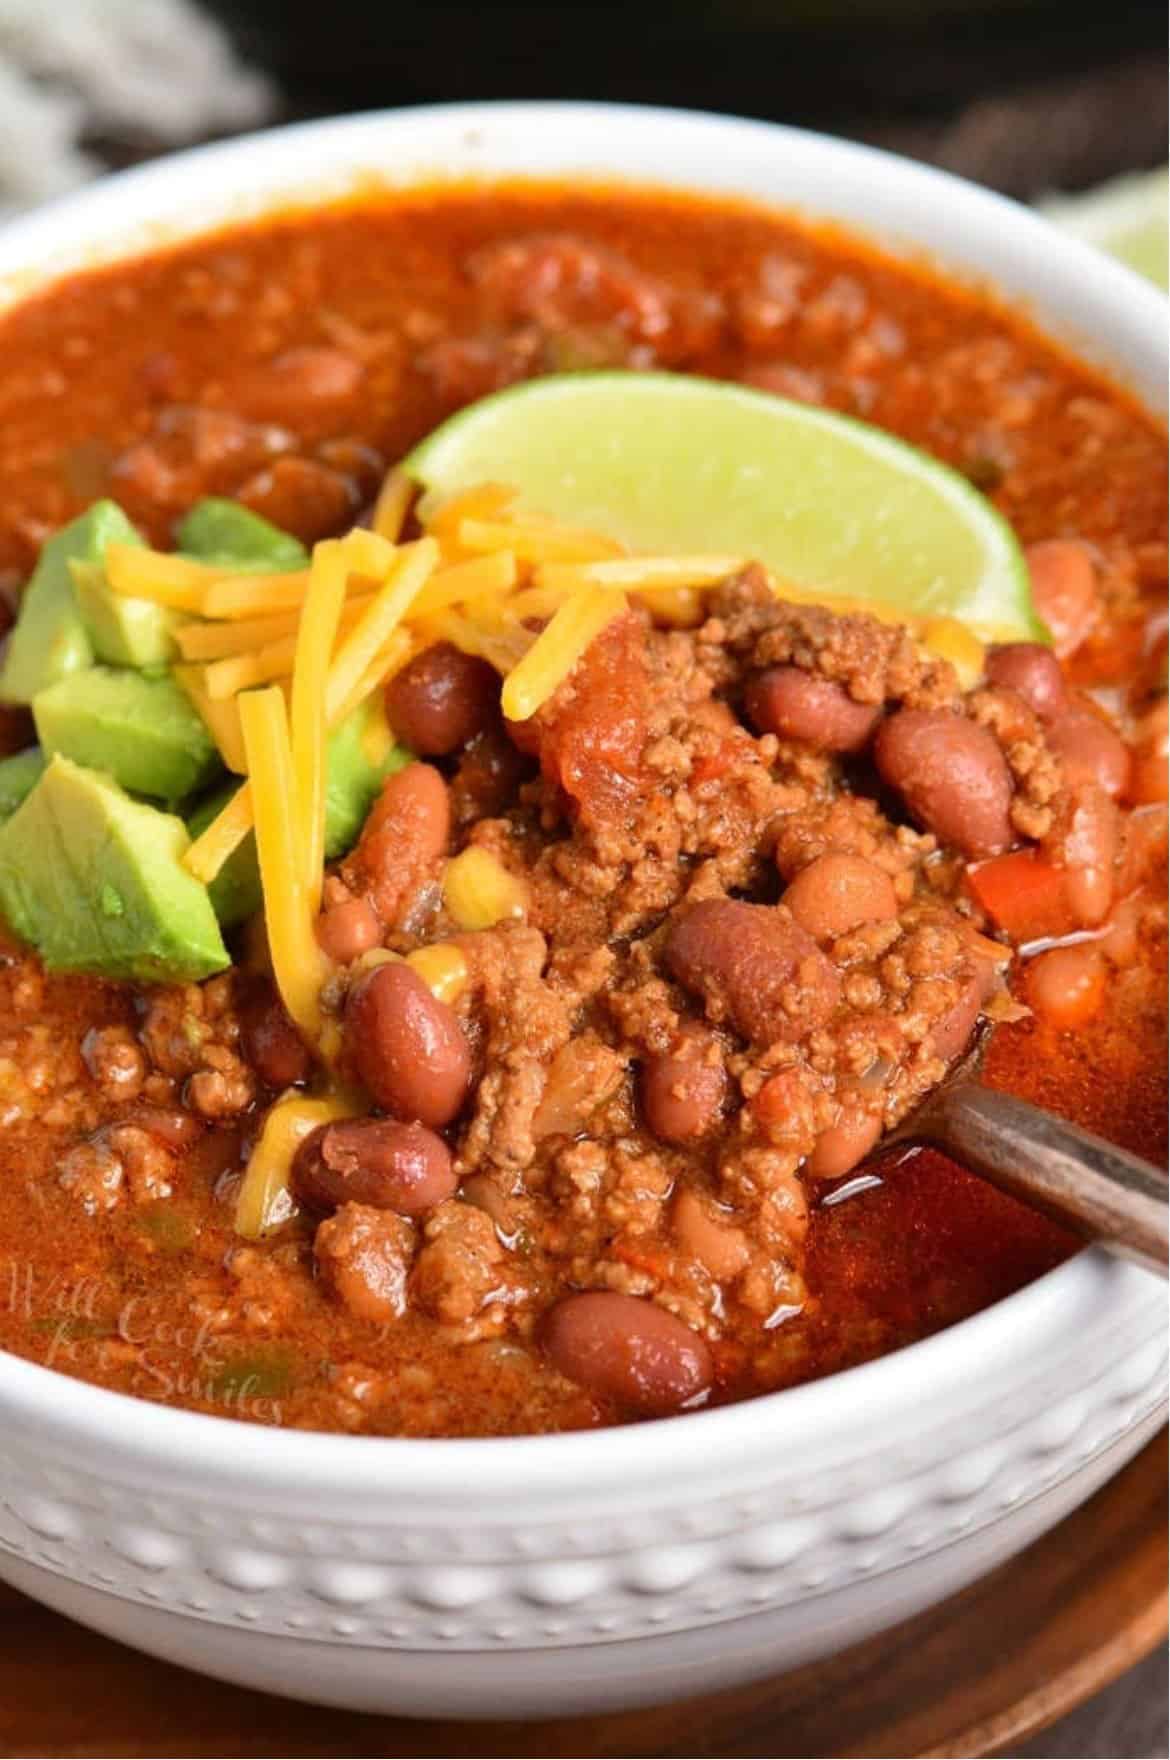 Bowl of chili with a spoon scooping some with avocado, cheese, and lime on top.